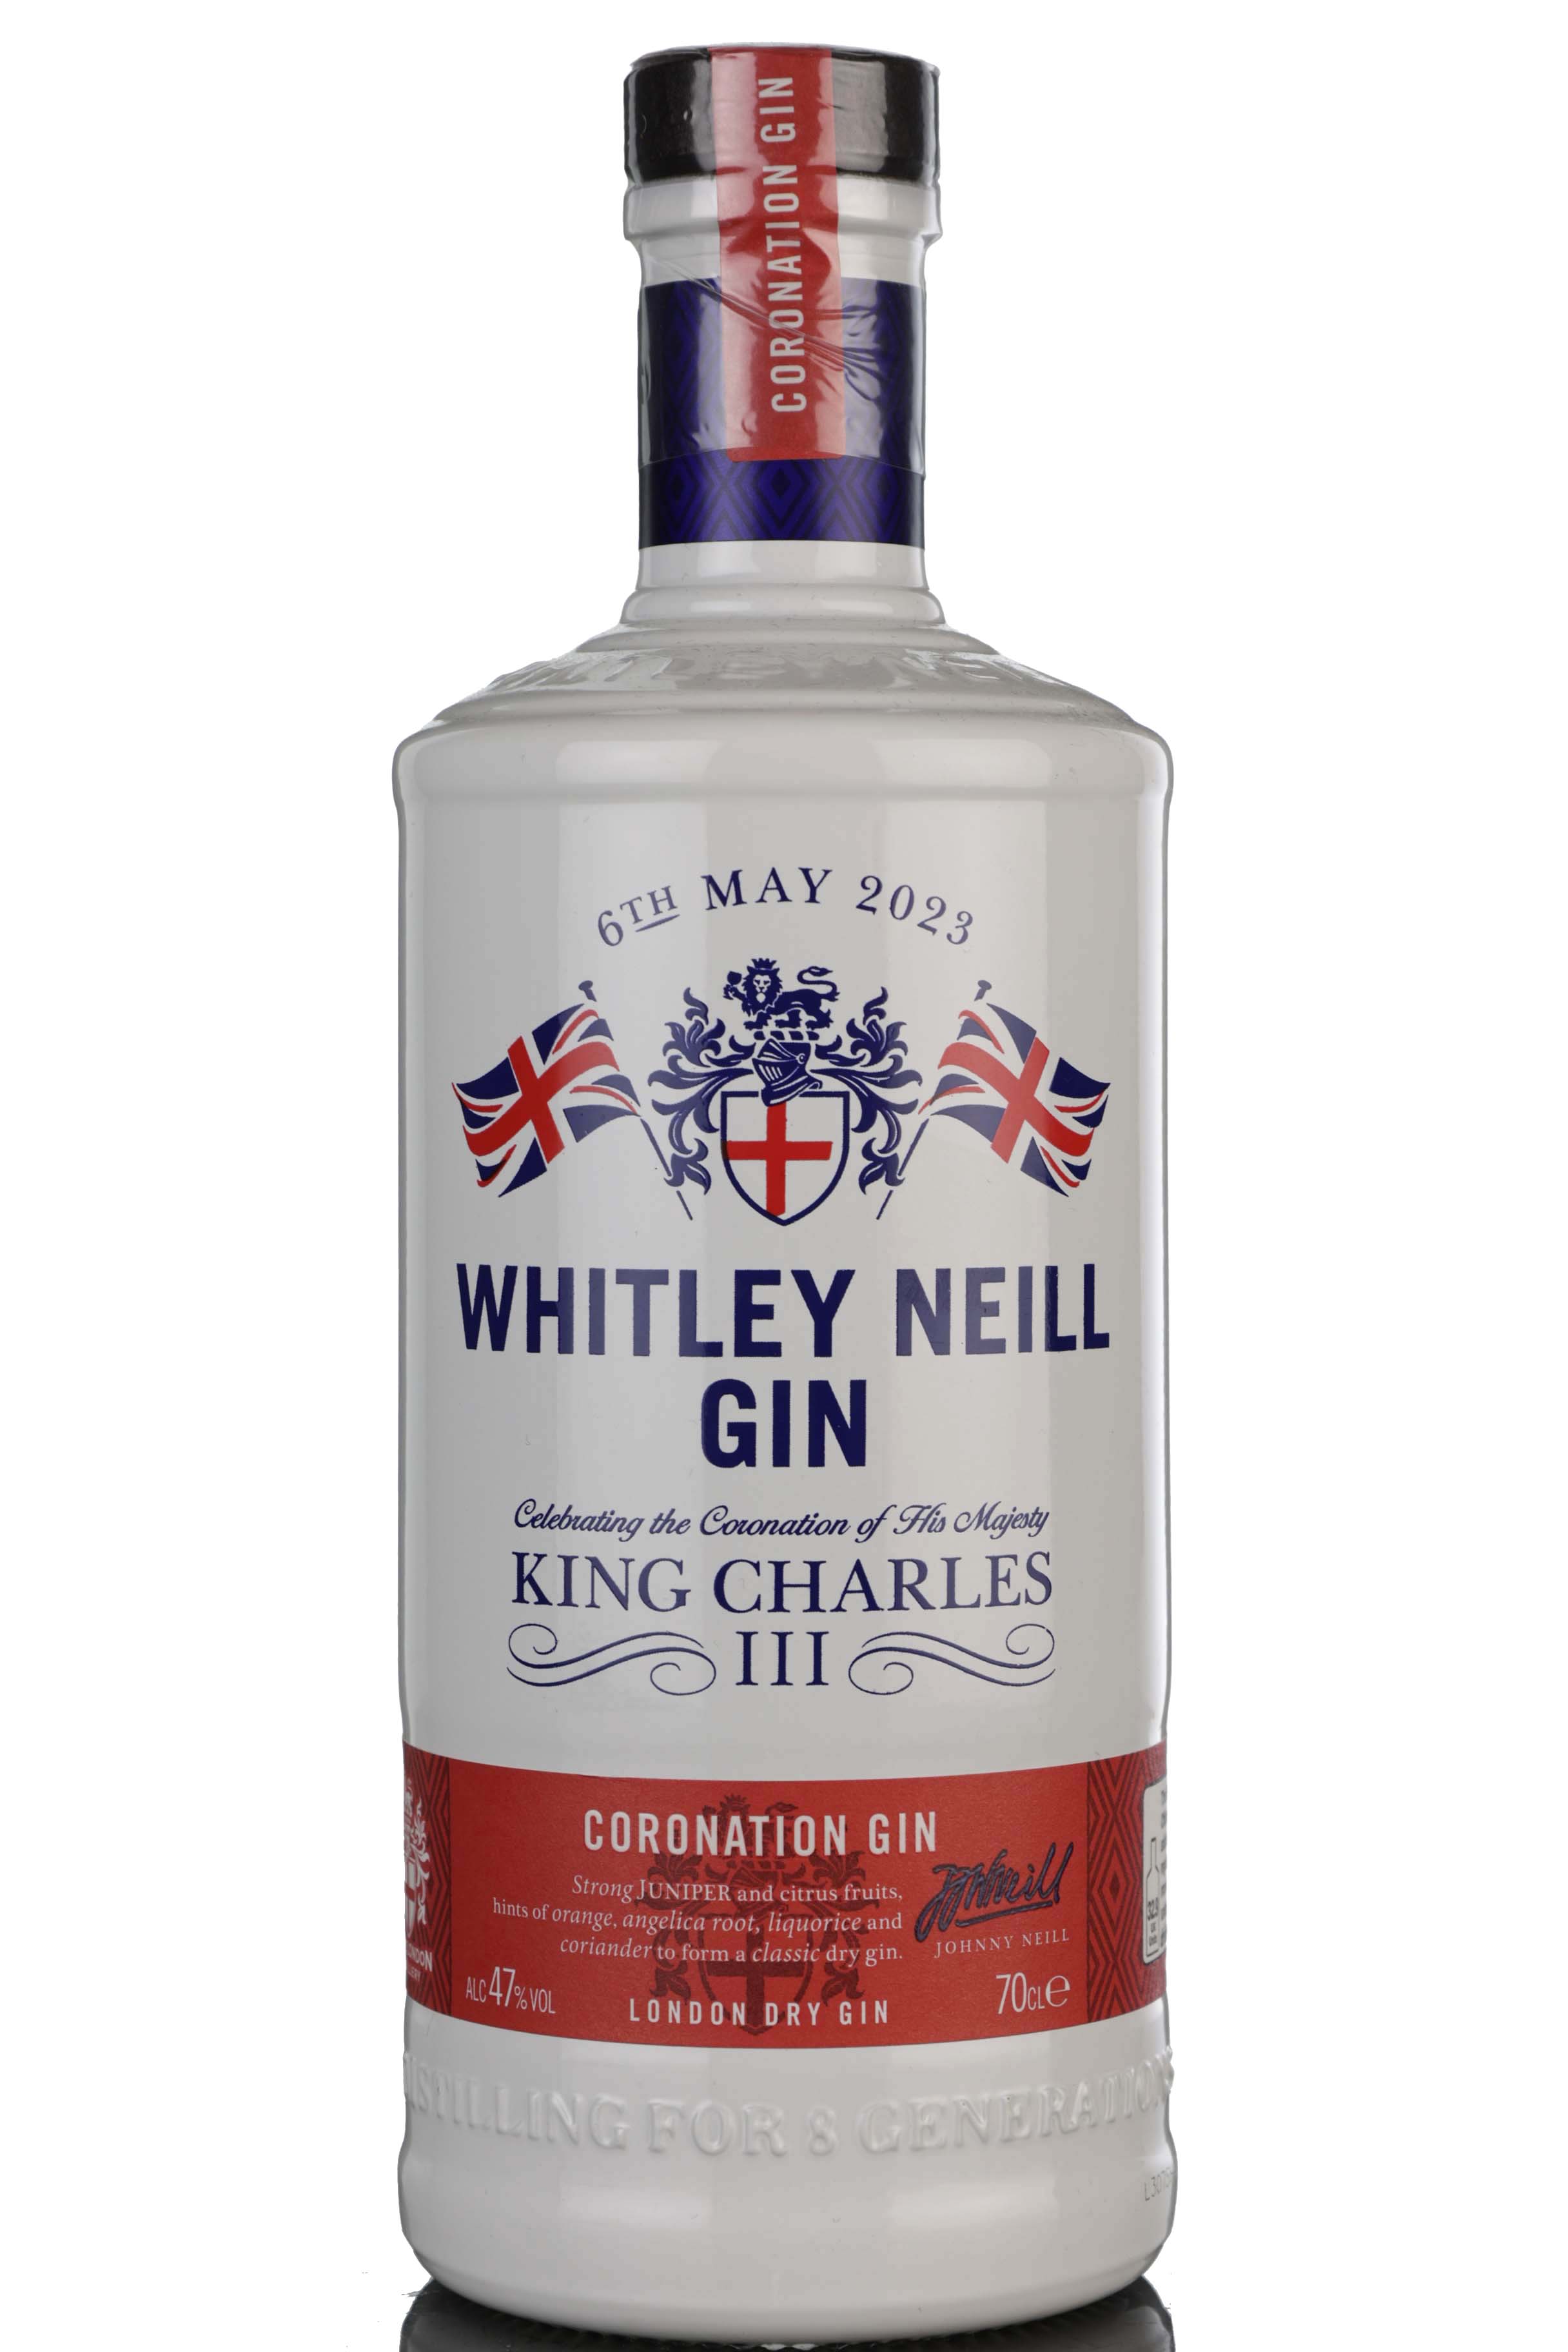 Whitley Neill Gin - Celebrating The Coronation Of King Charles III 2023